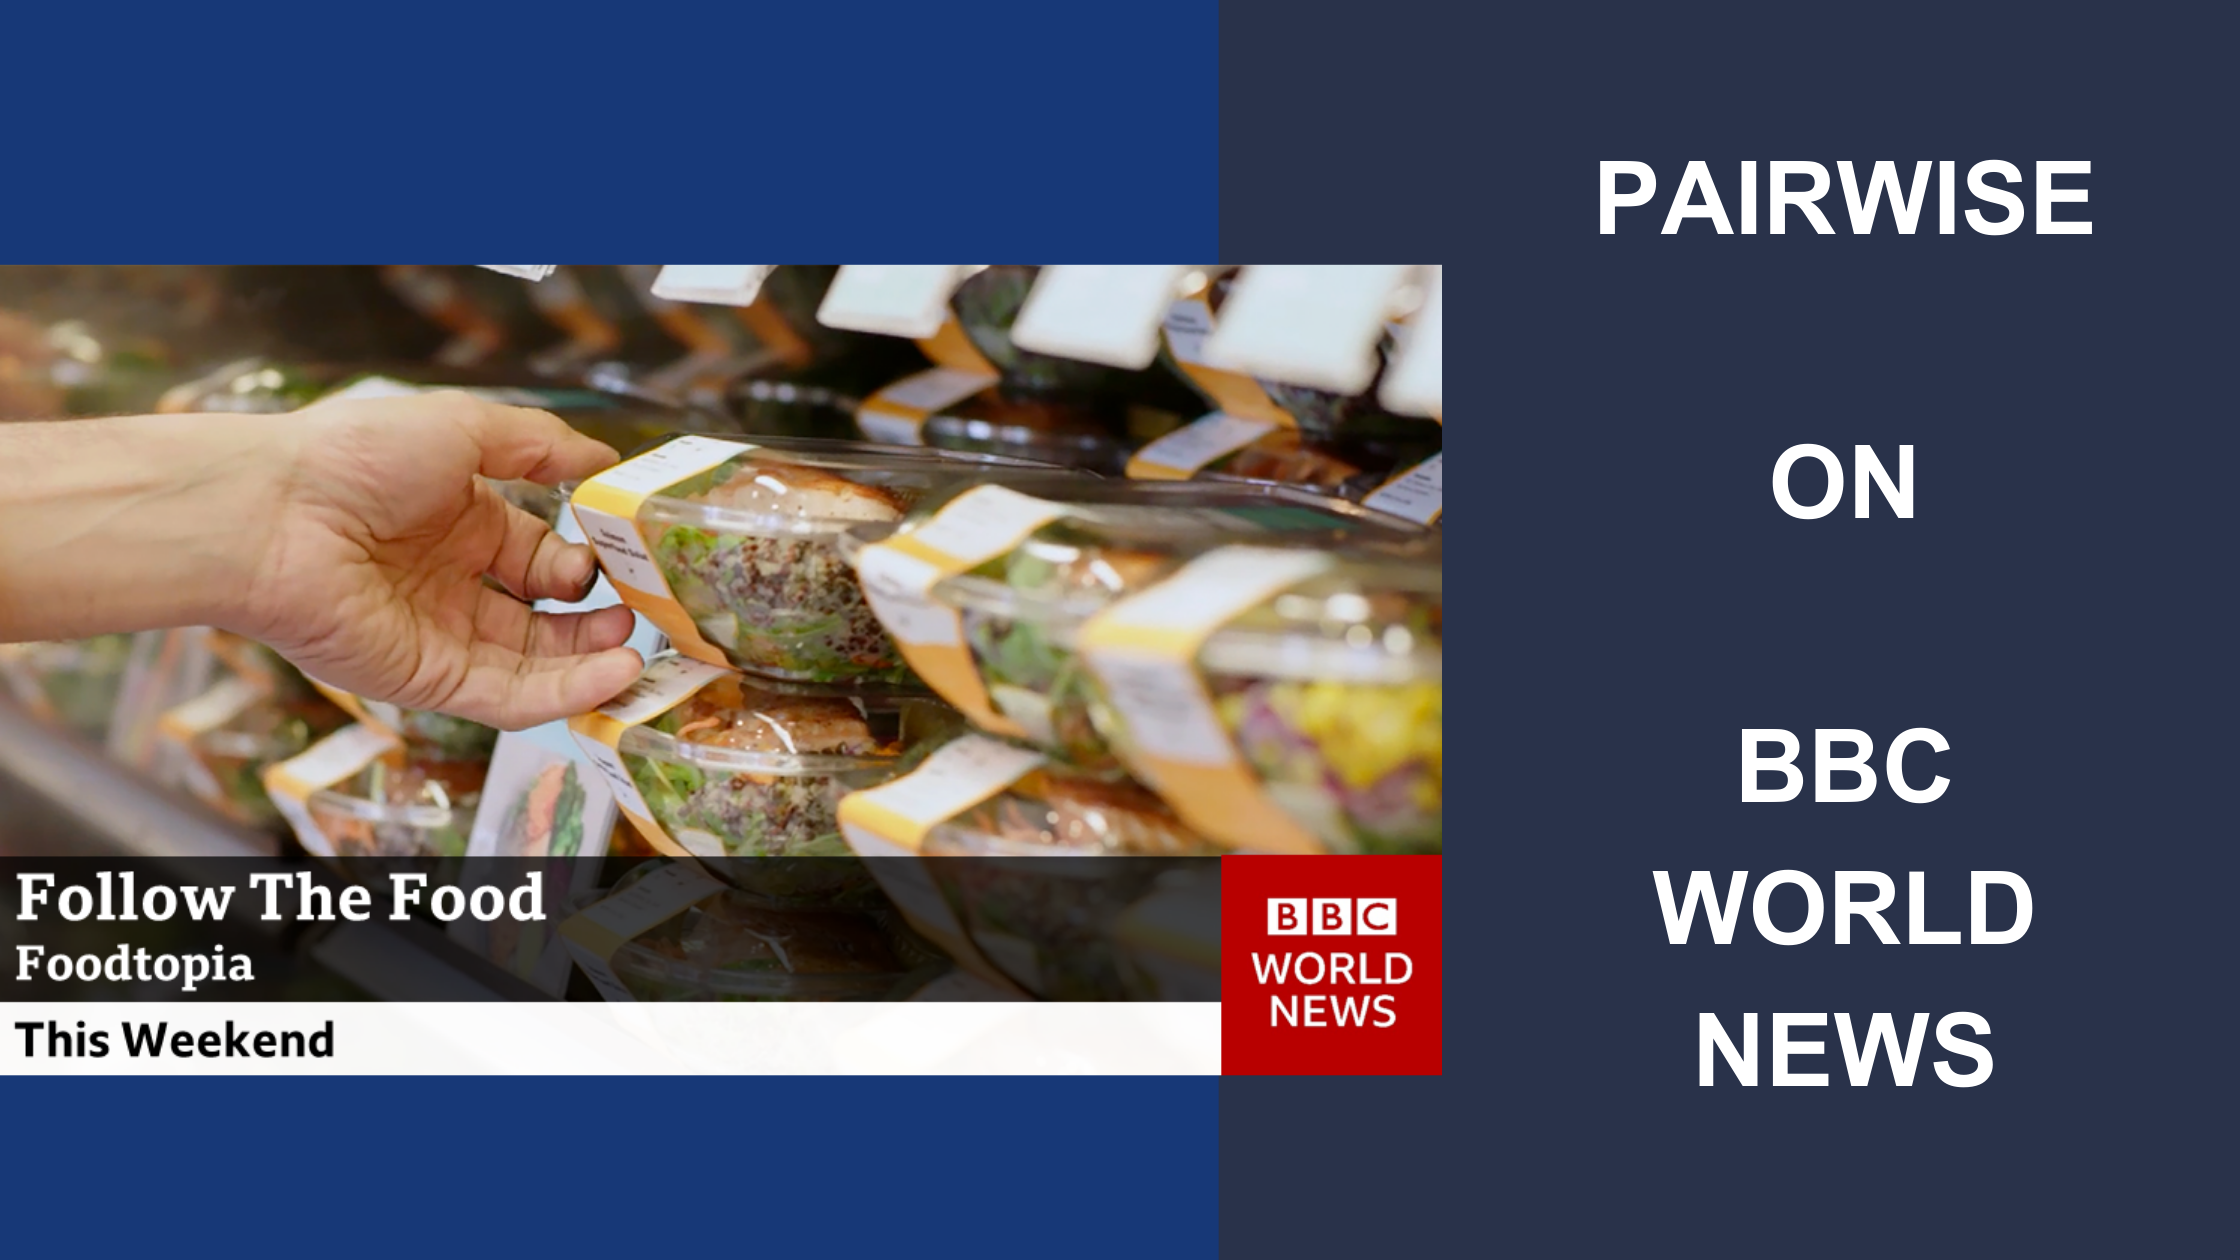 Pairwise featured on BBC World News' Follow the Food Series